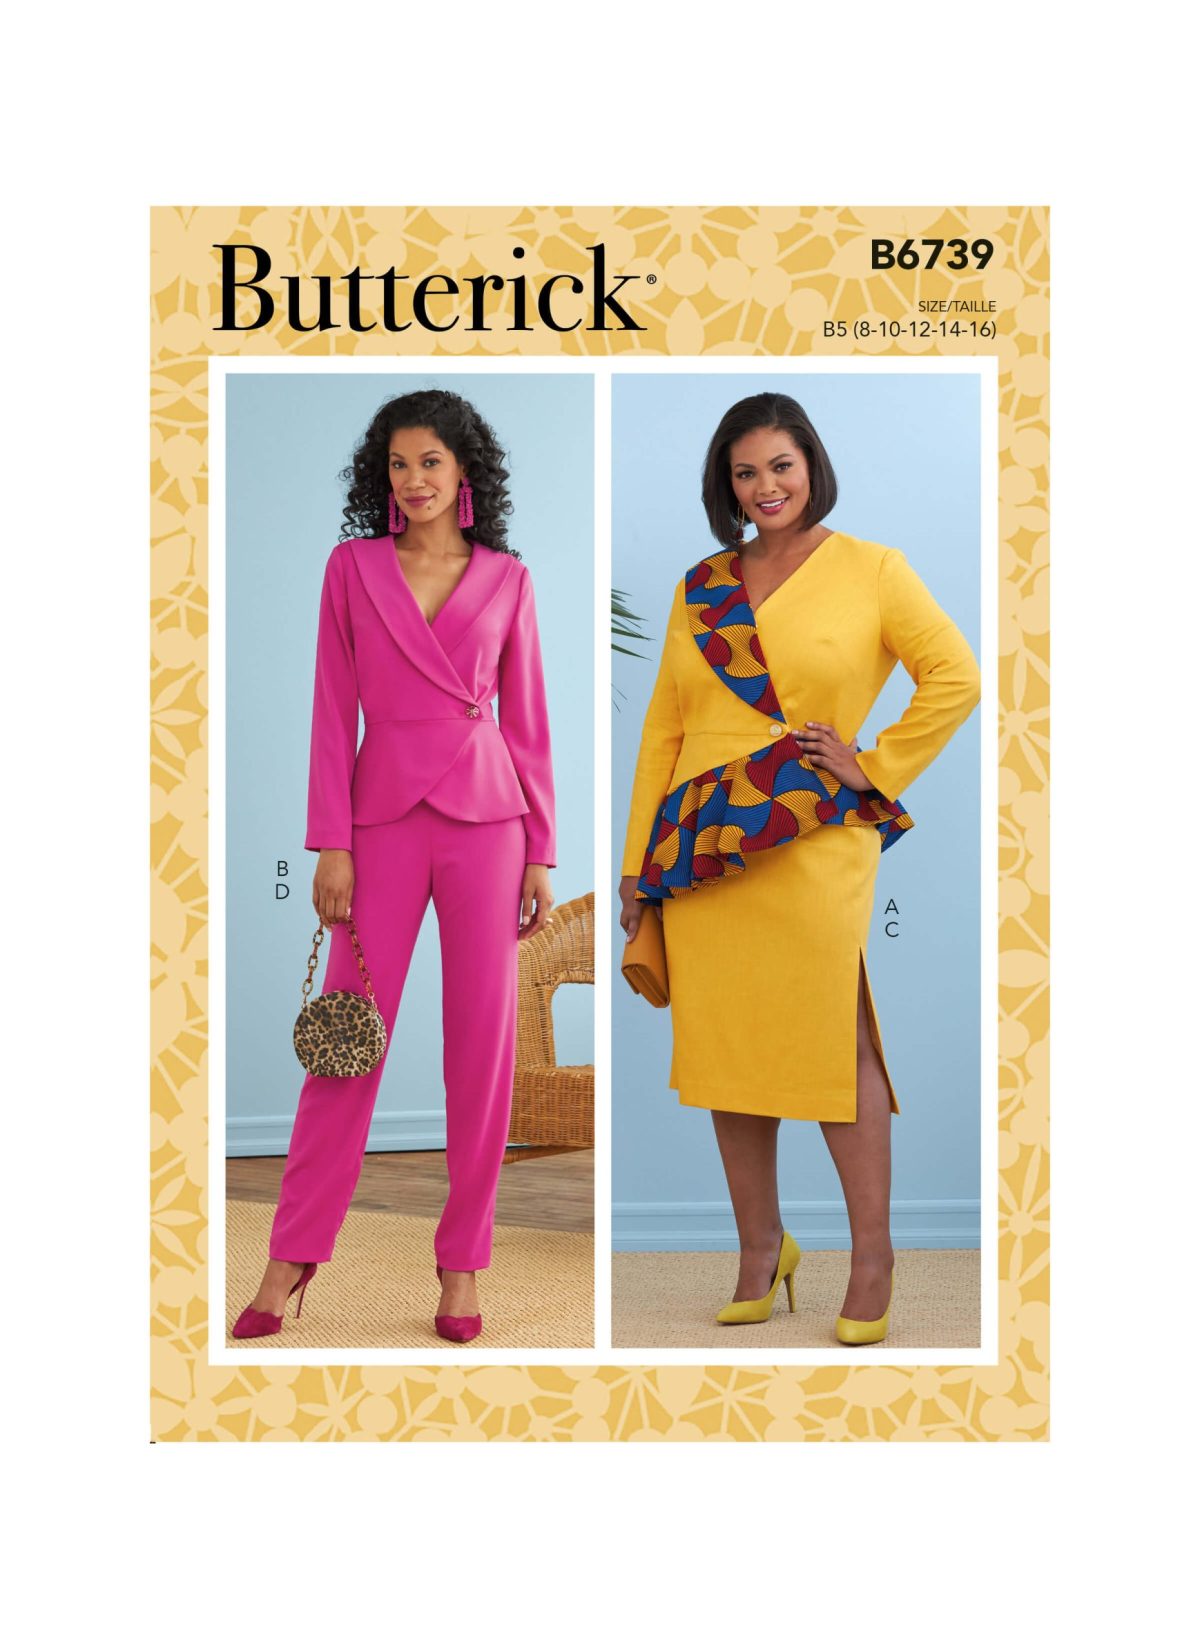 Butterick Sewing Pattern B6739 Misses' Jacket, Dress, Top, Skirt & Trousers